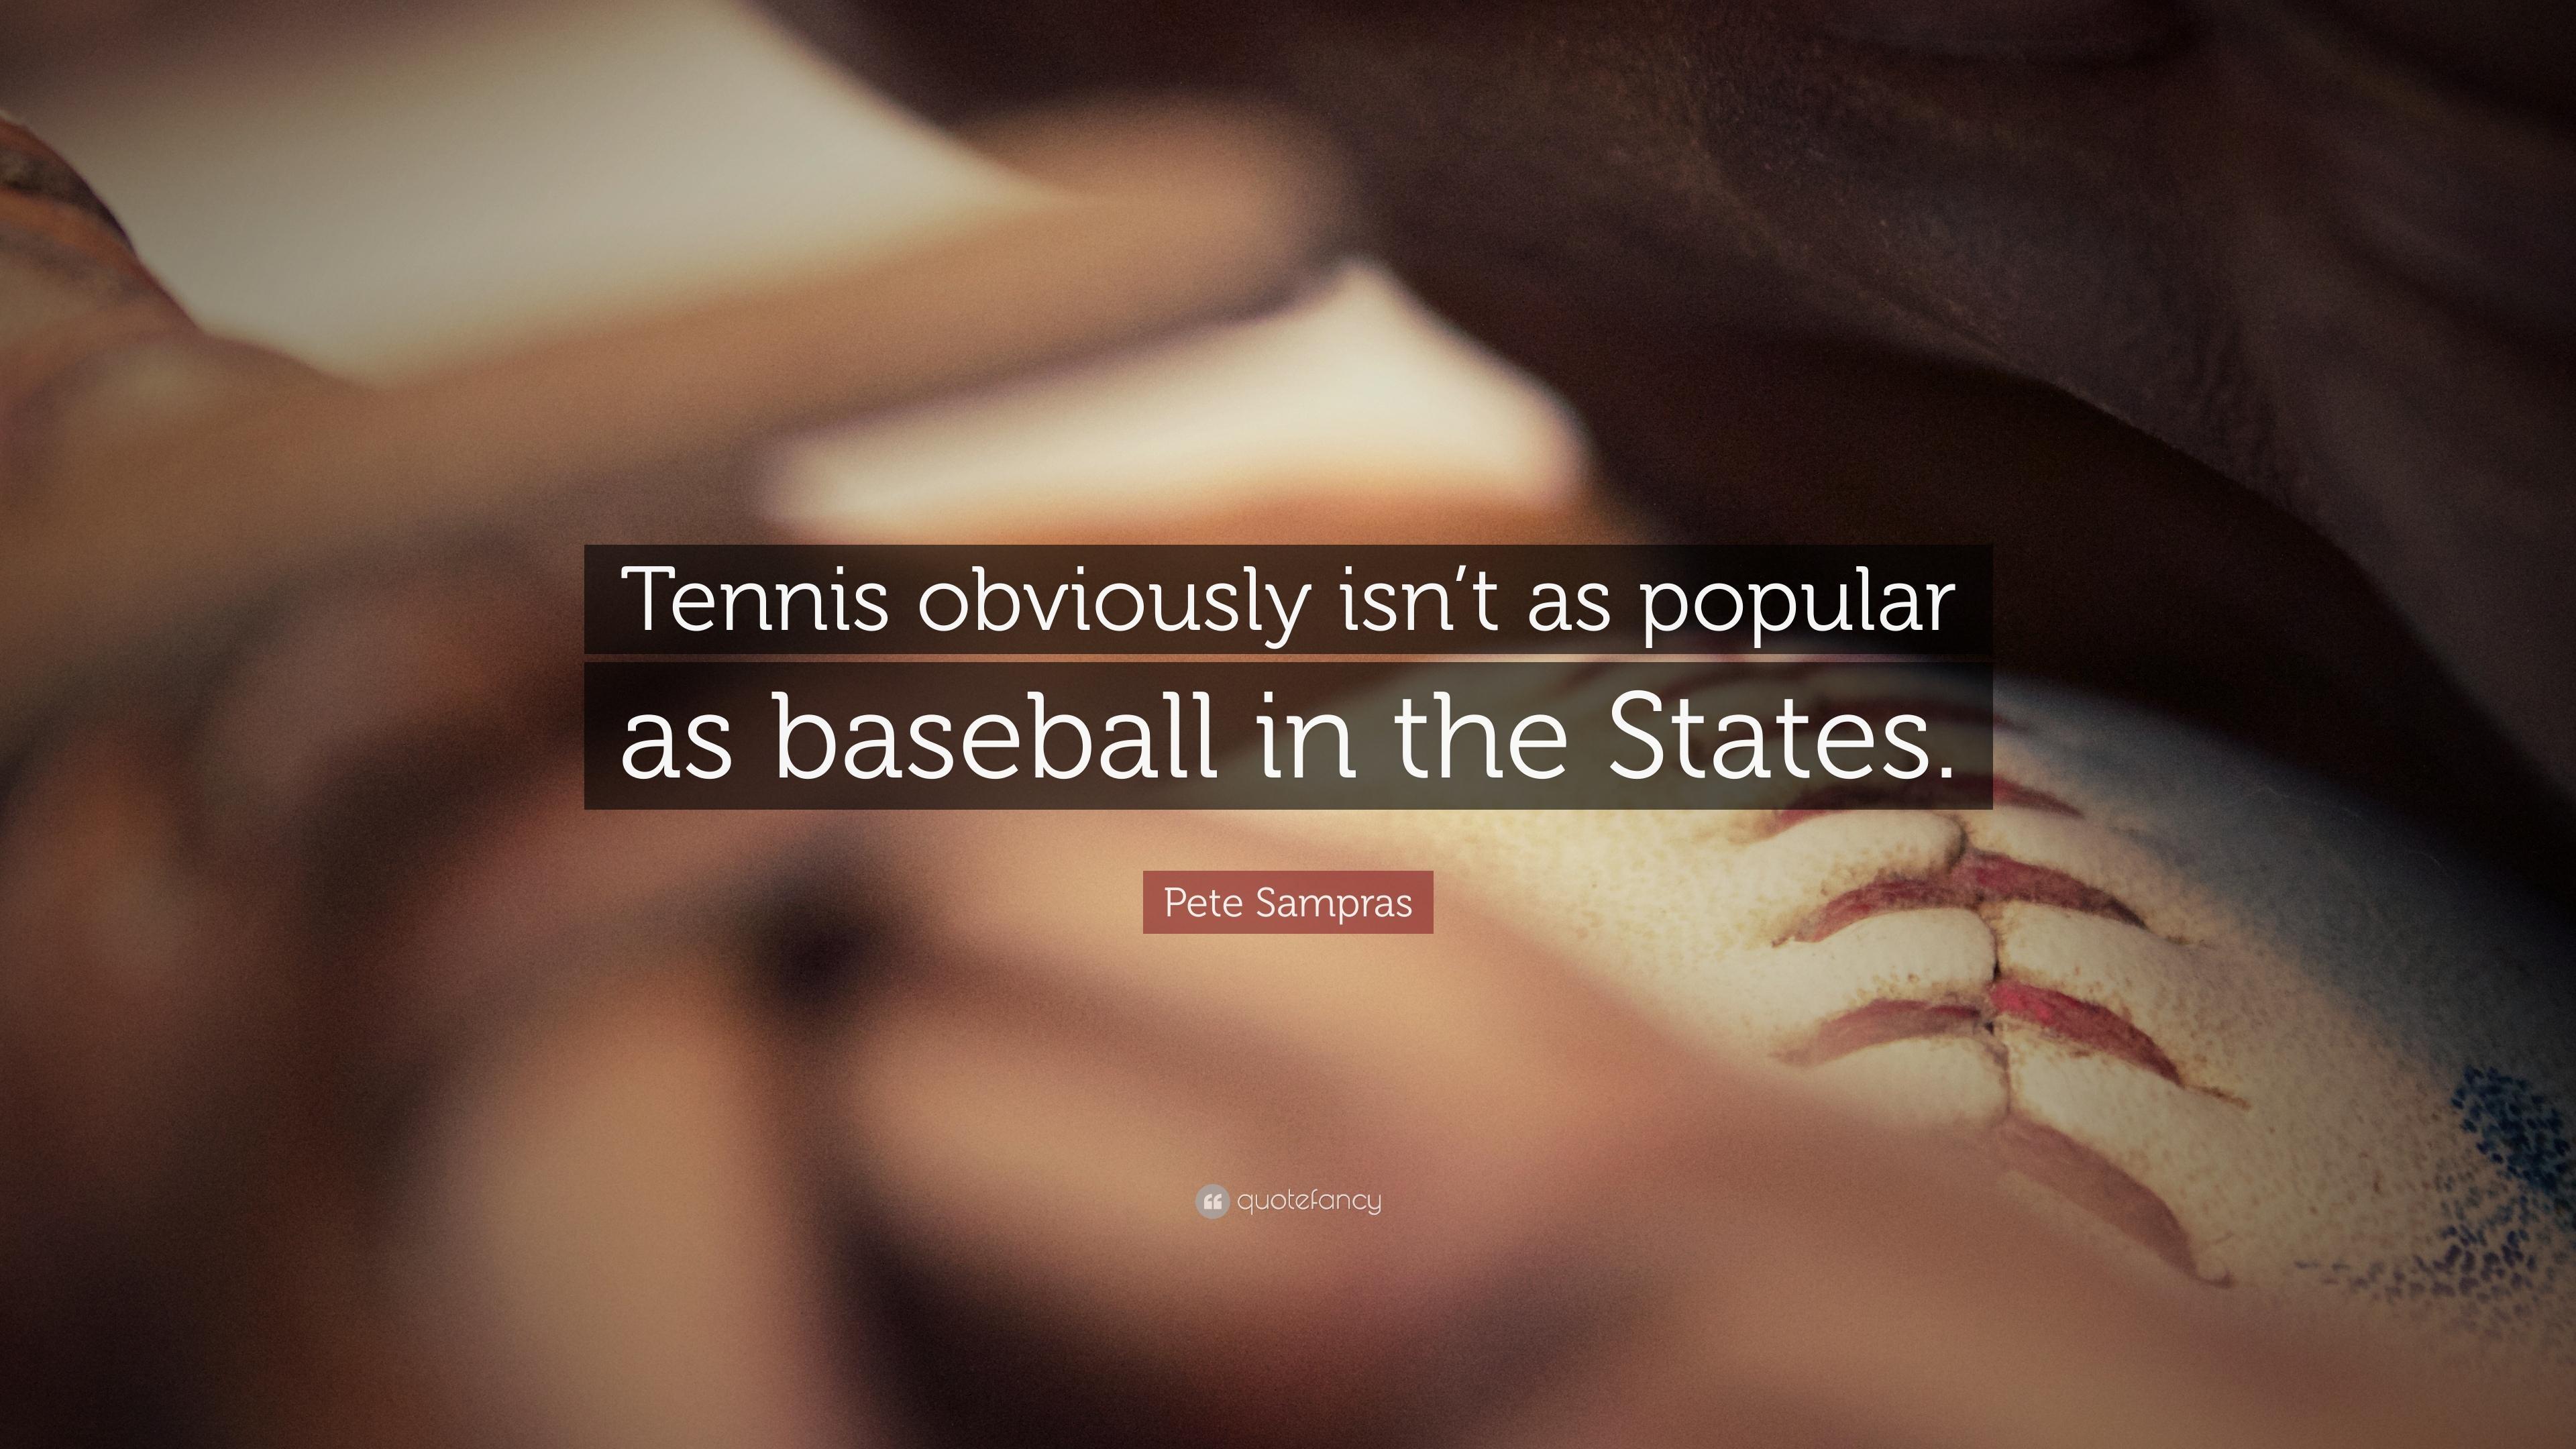 Pete Sampras Quote: “Tennis obviously isn't as popular as